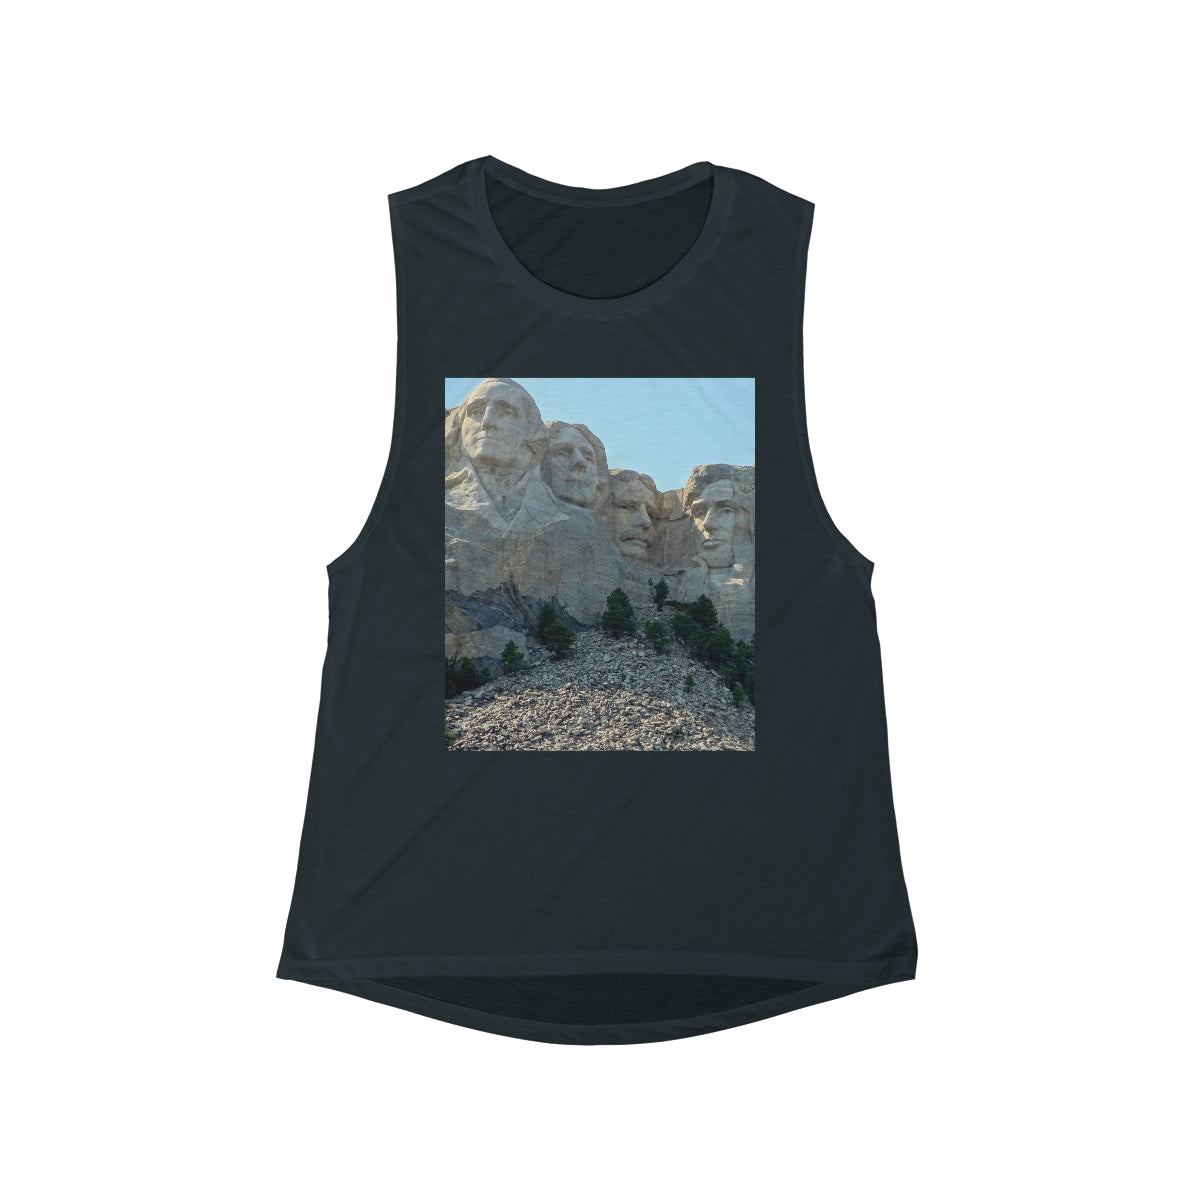 History Remembered Forever - Women's Flowy Scoop Muscle Tank - Fry1Productions